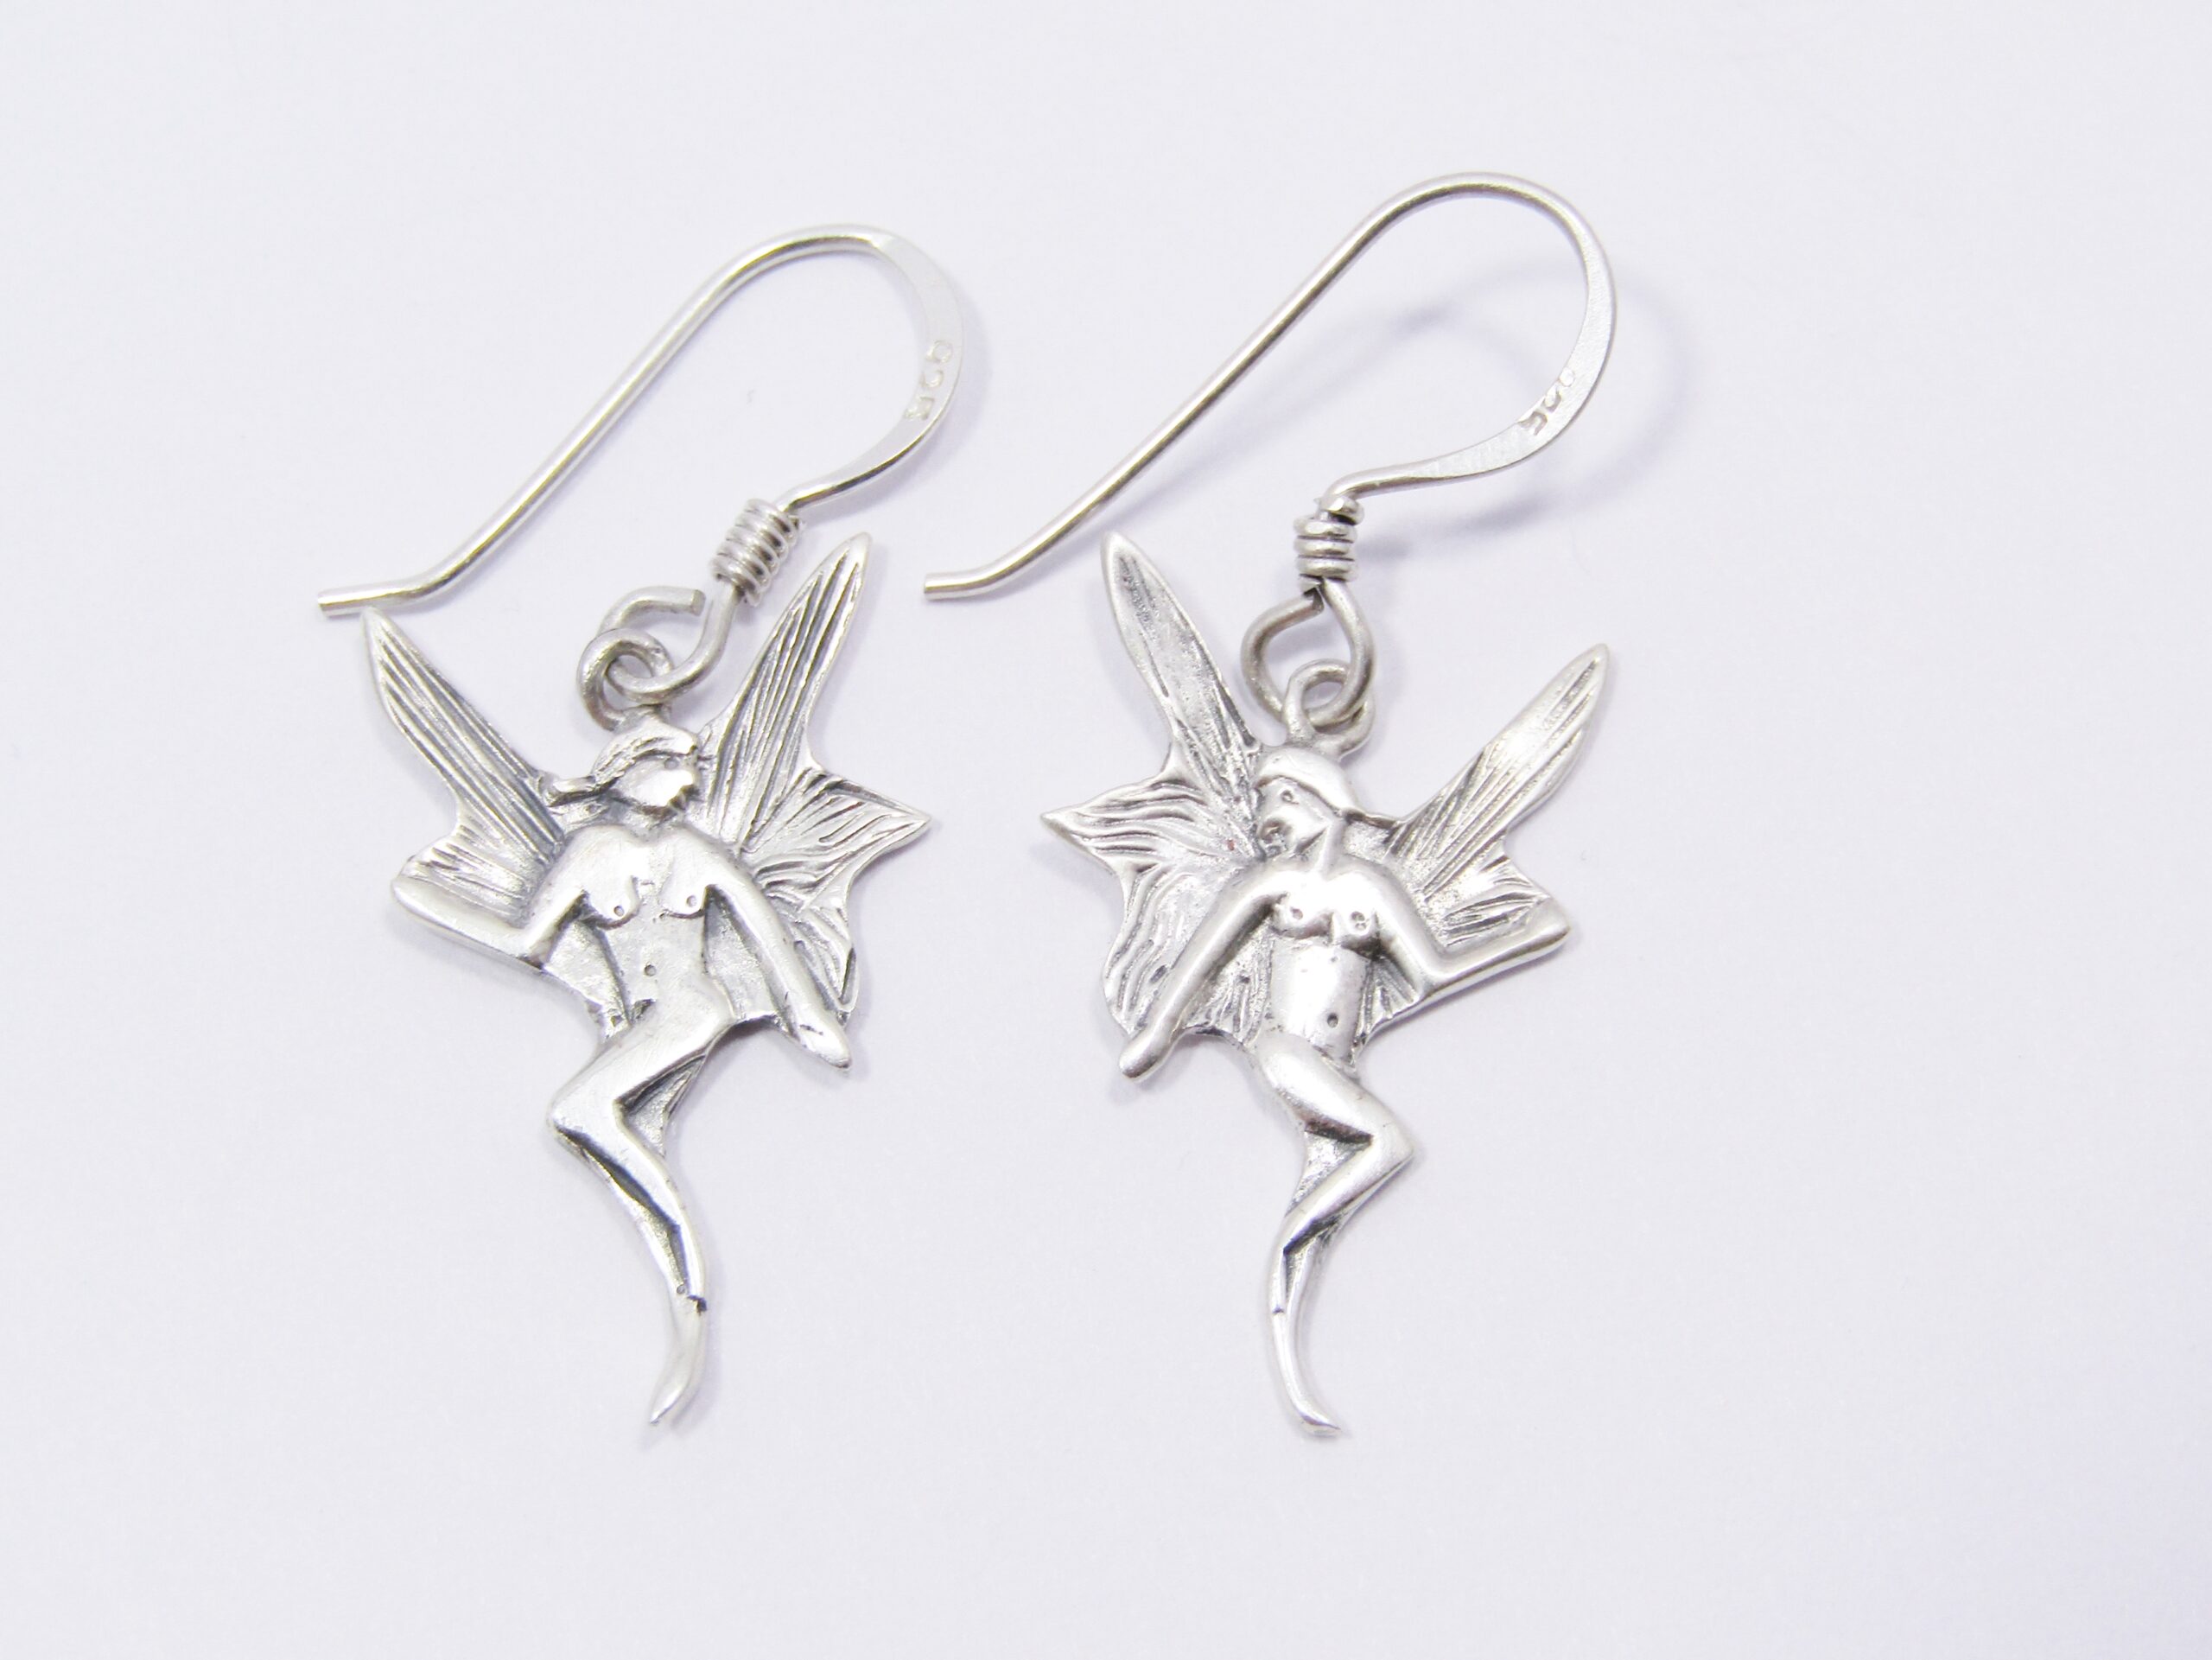 A Gorgeous Pair of Fairy Design Earrings in Sterling Silver.